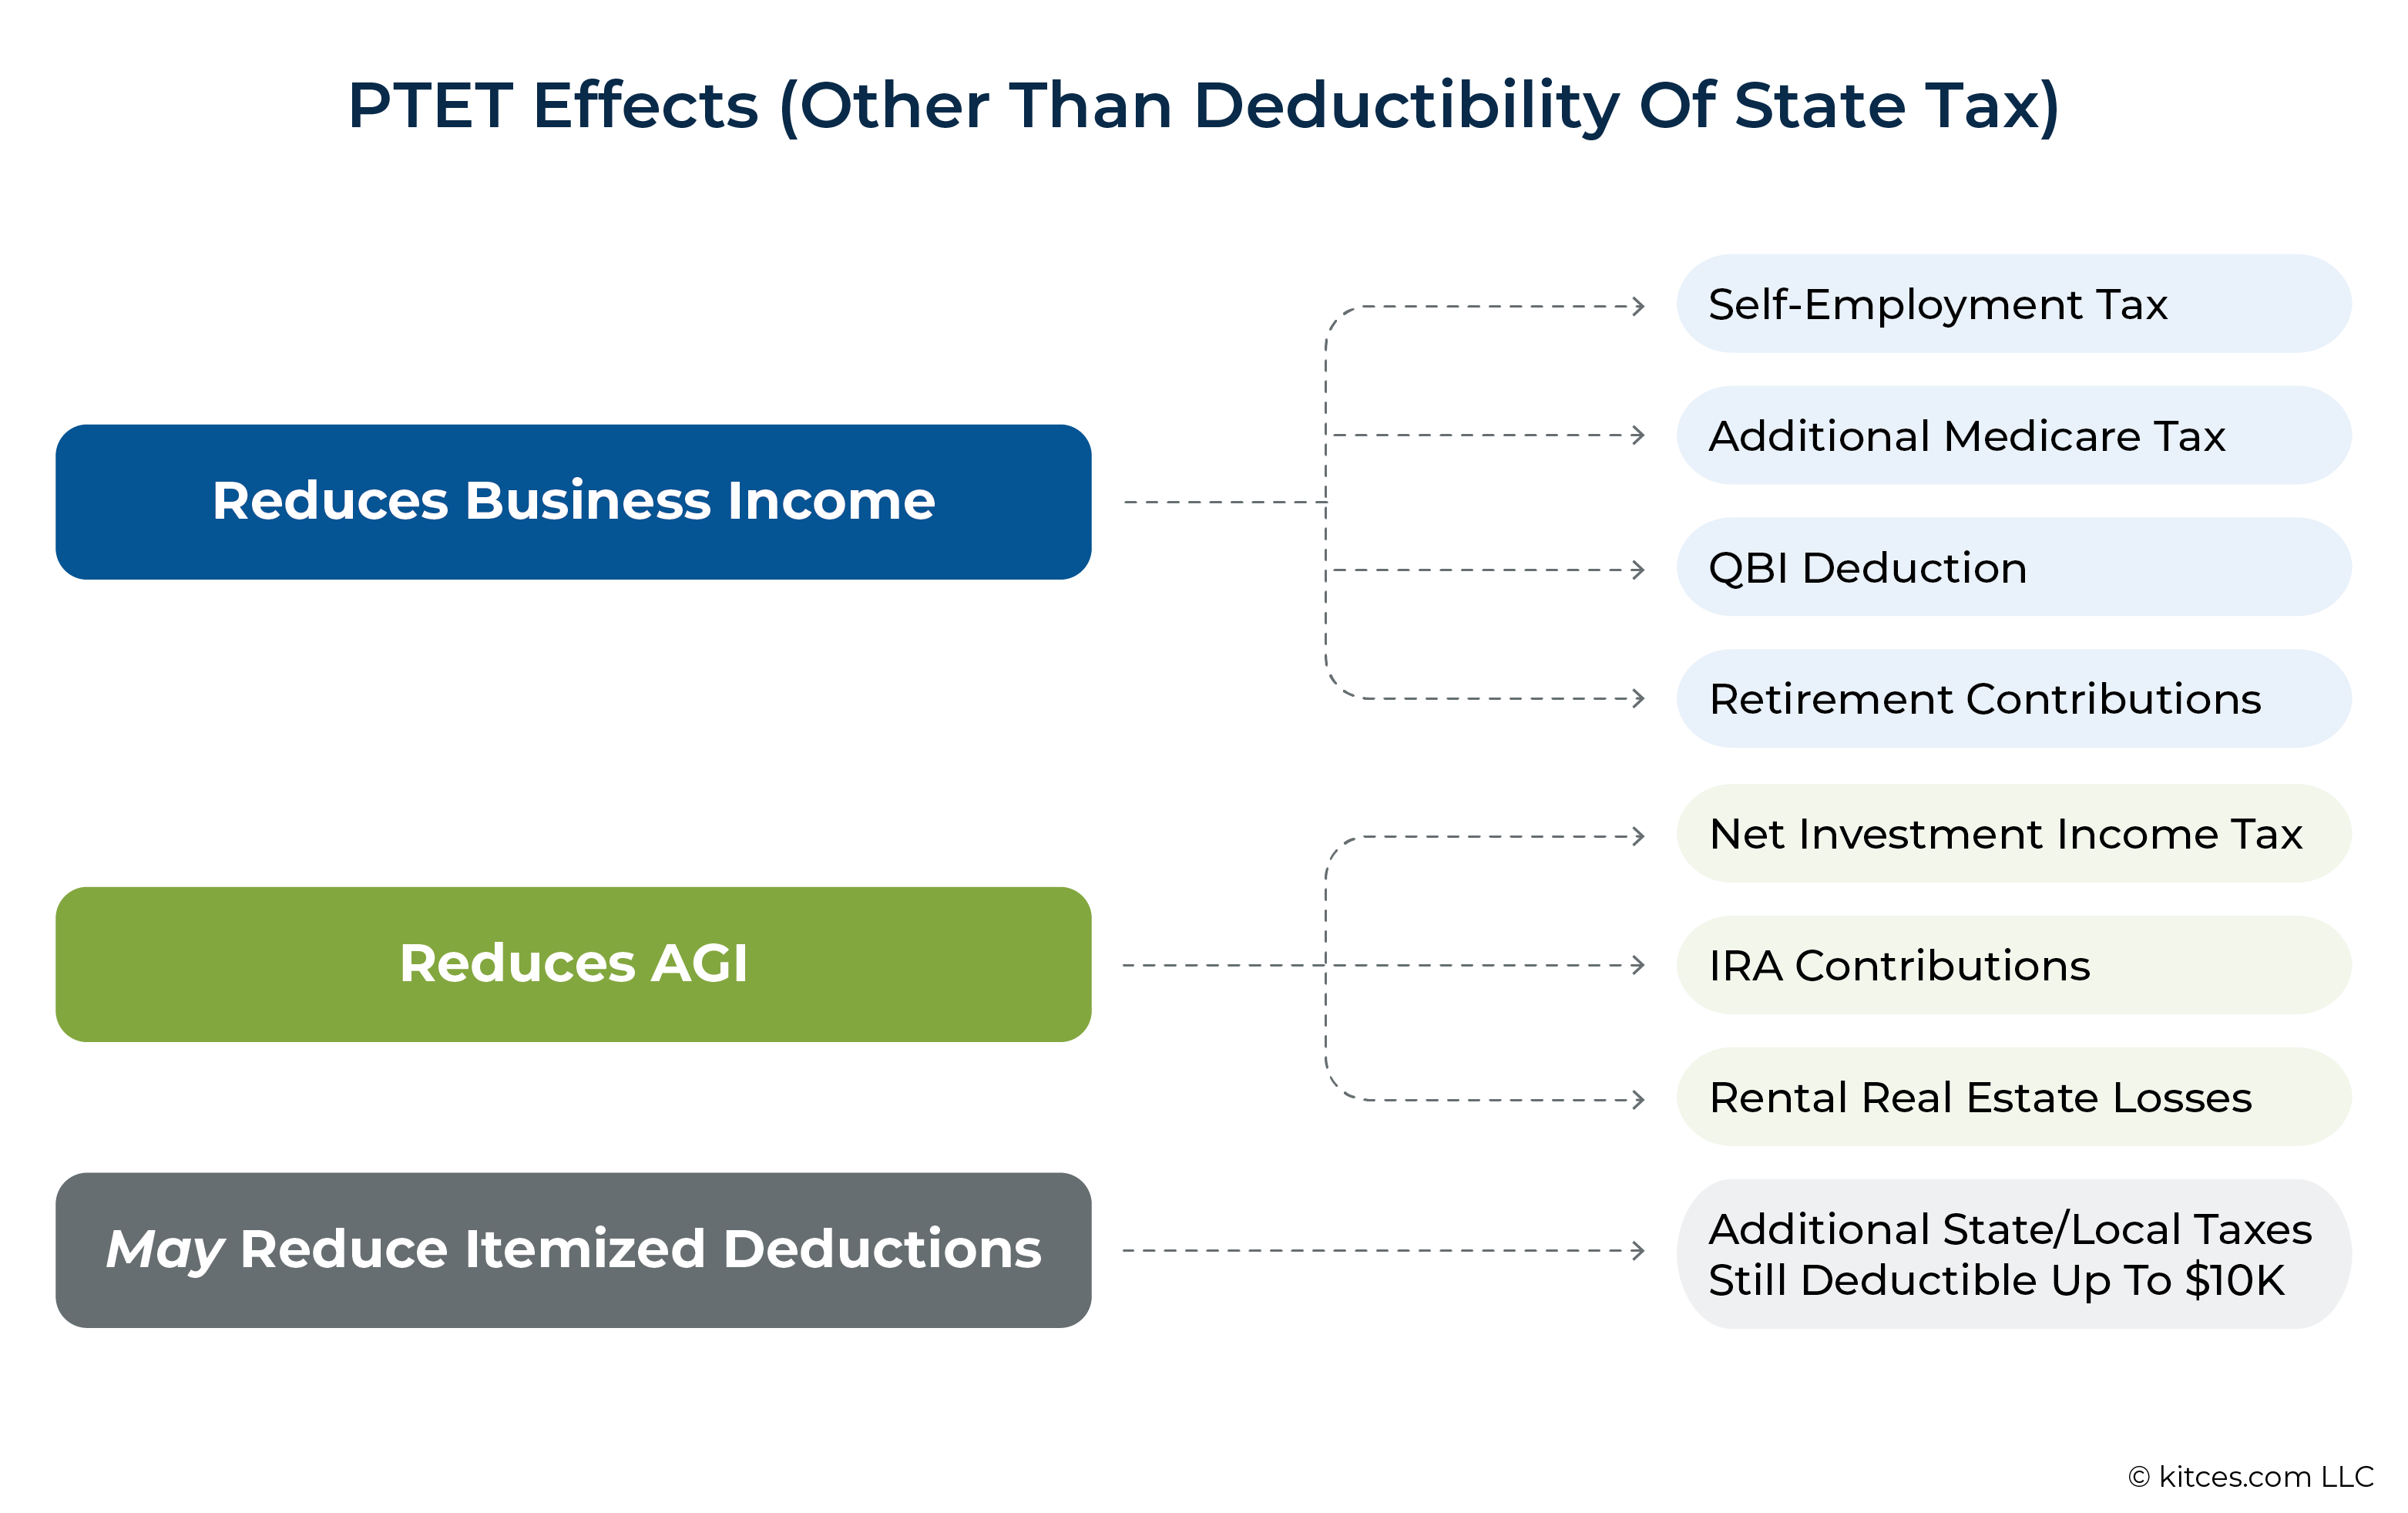 PTET Effects Other Than Deductibility Of State Tax